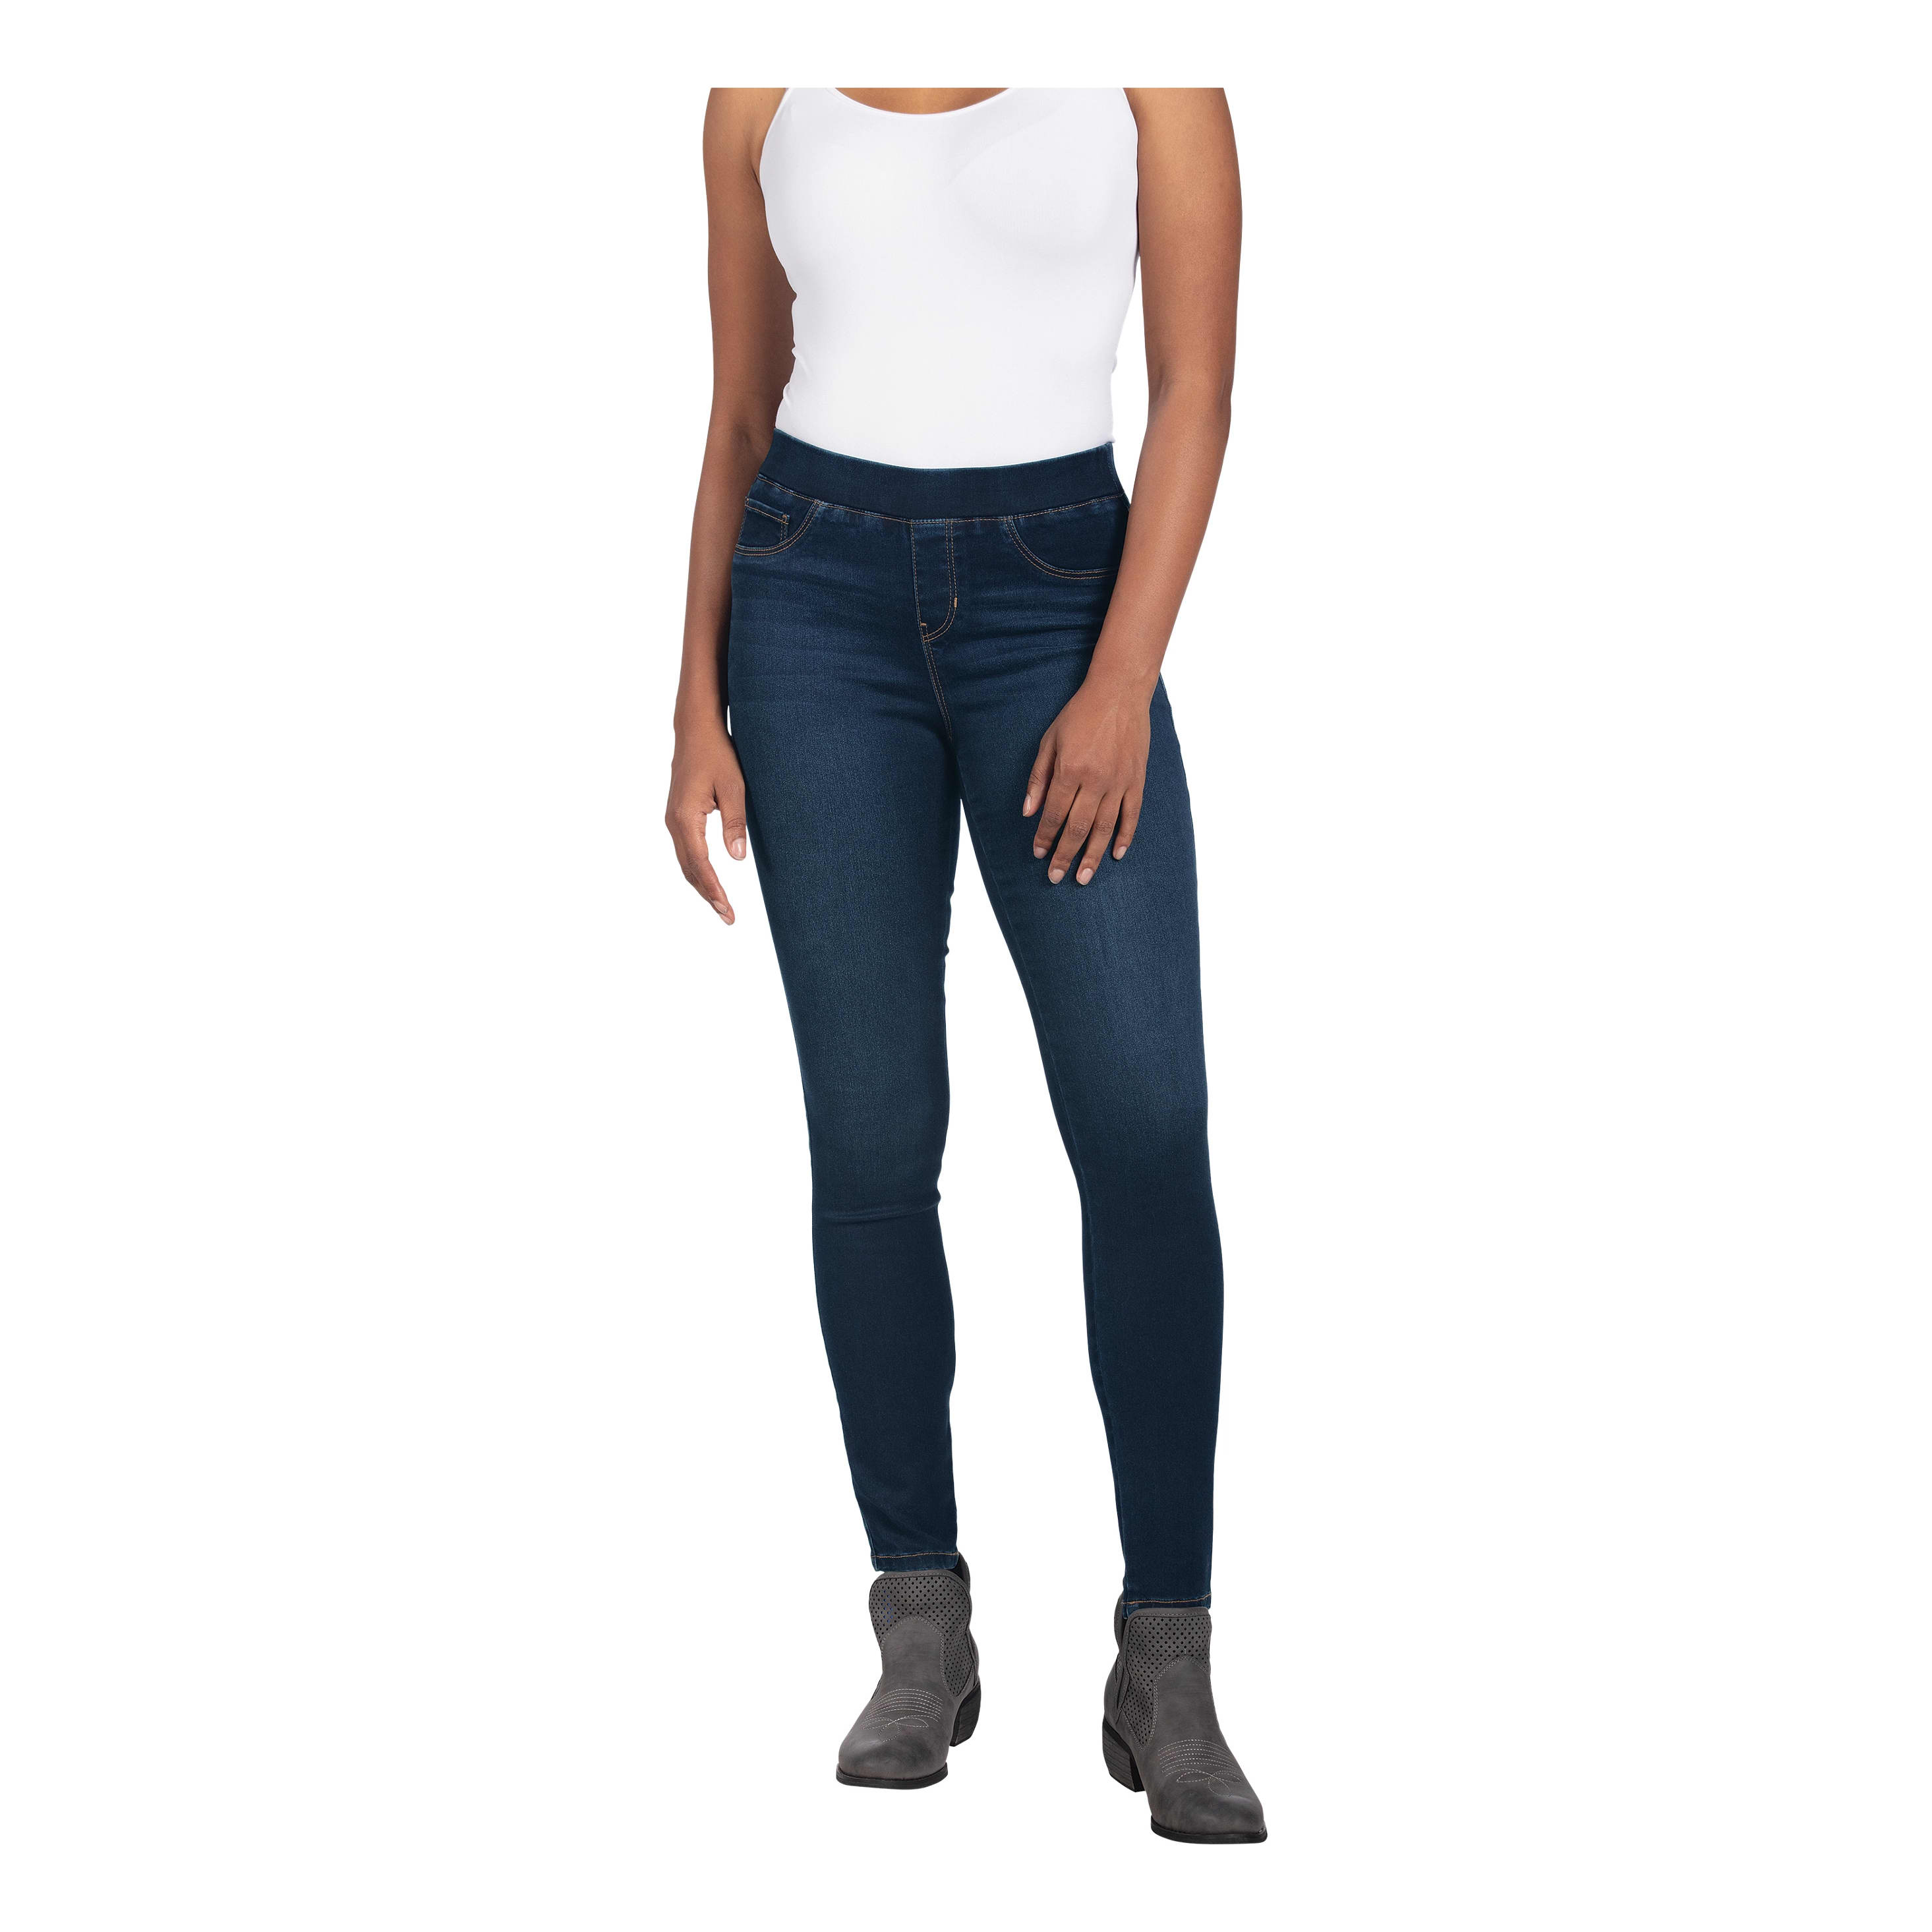 Shop Women's New Look Jeggings up to 70% Off